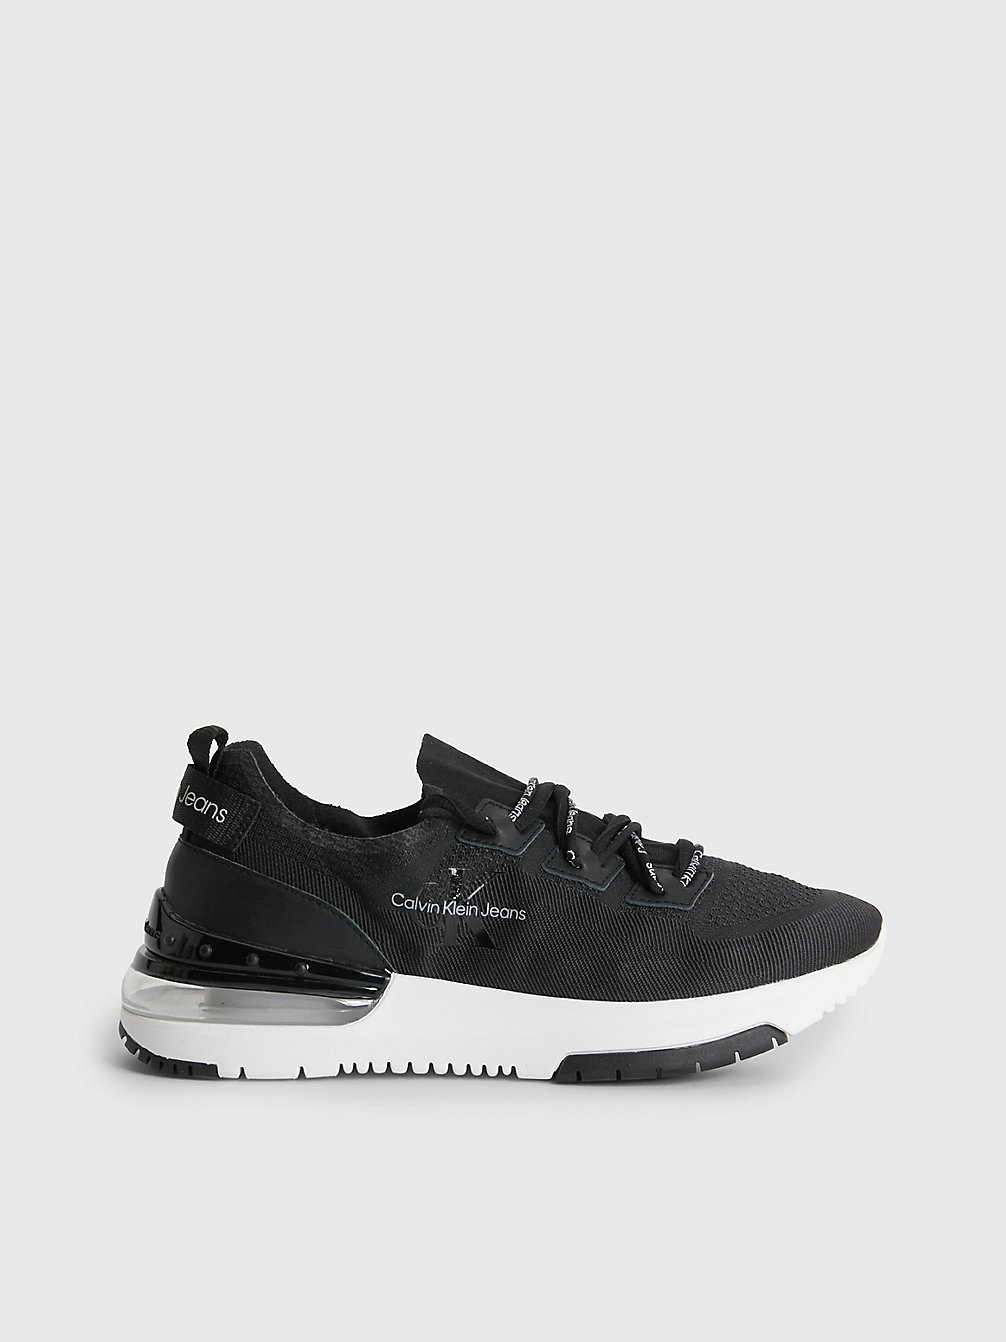 BLACK / WHITE Recycled Knit Trainers undefined women Calvin Klein